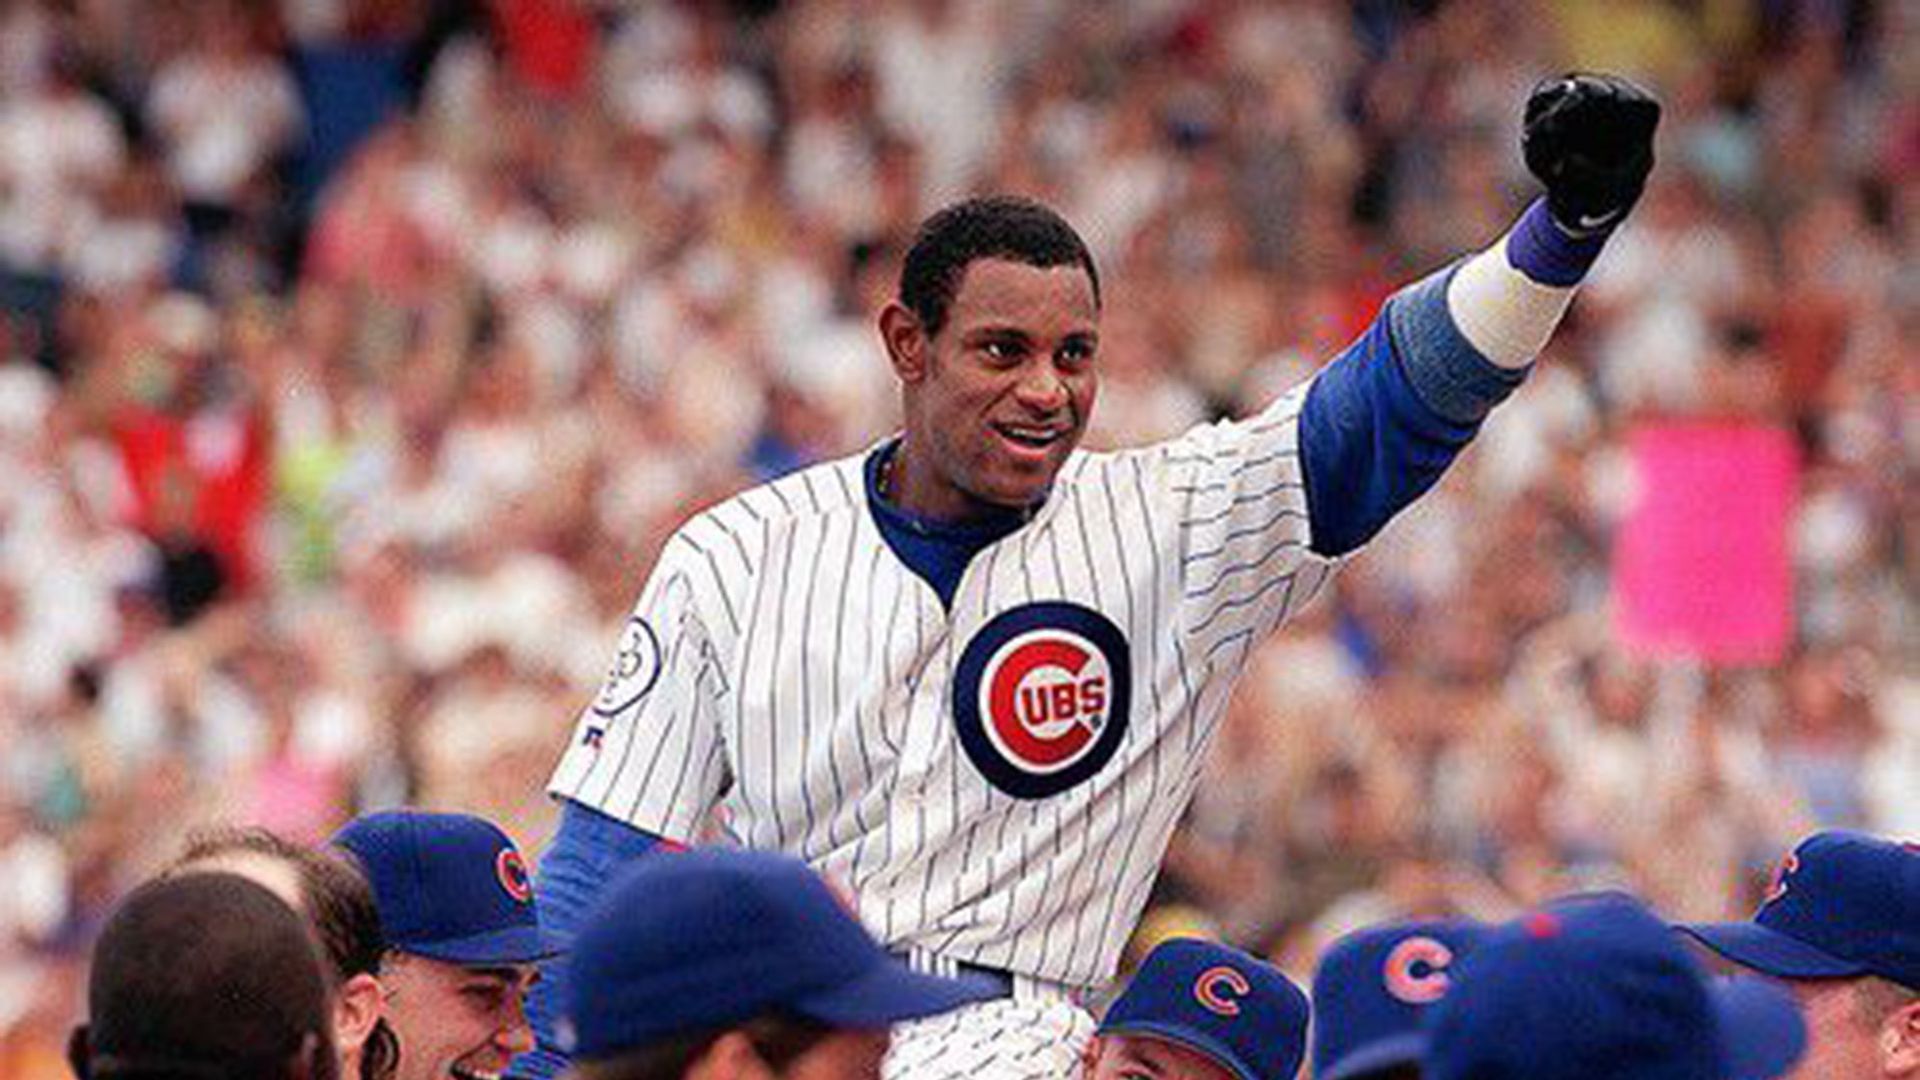 Remembering Sammy Sosa's 1998 home run chase - Axios Chicago